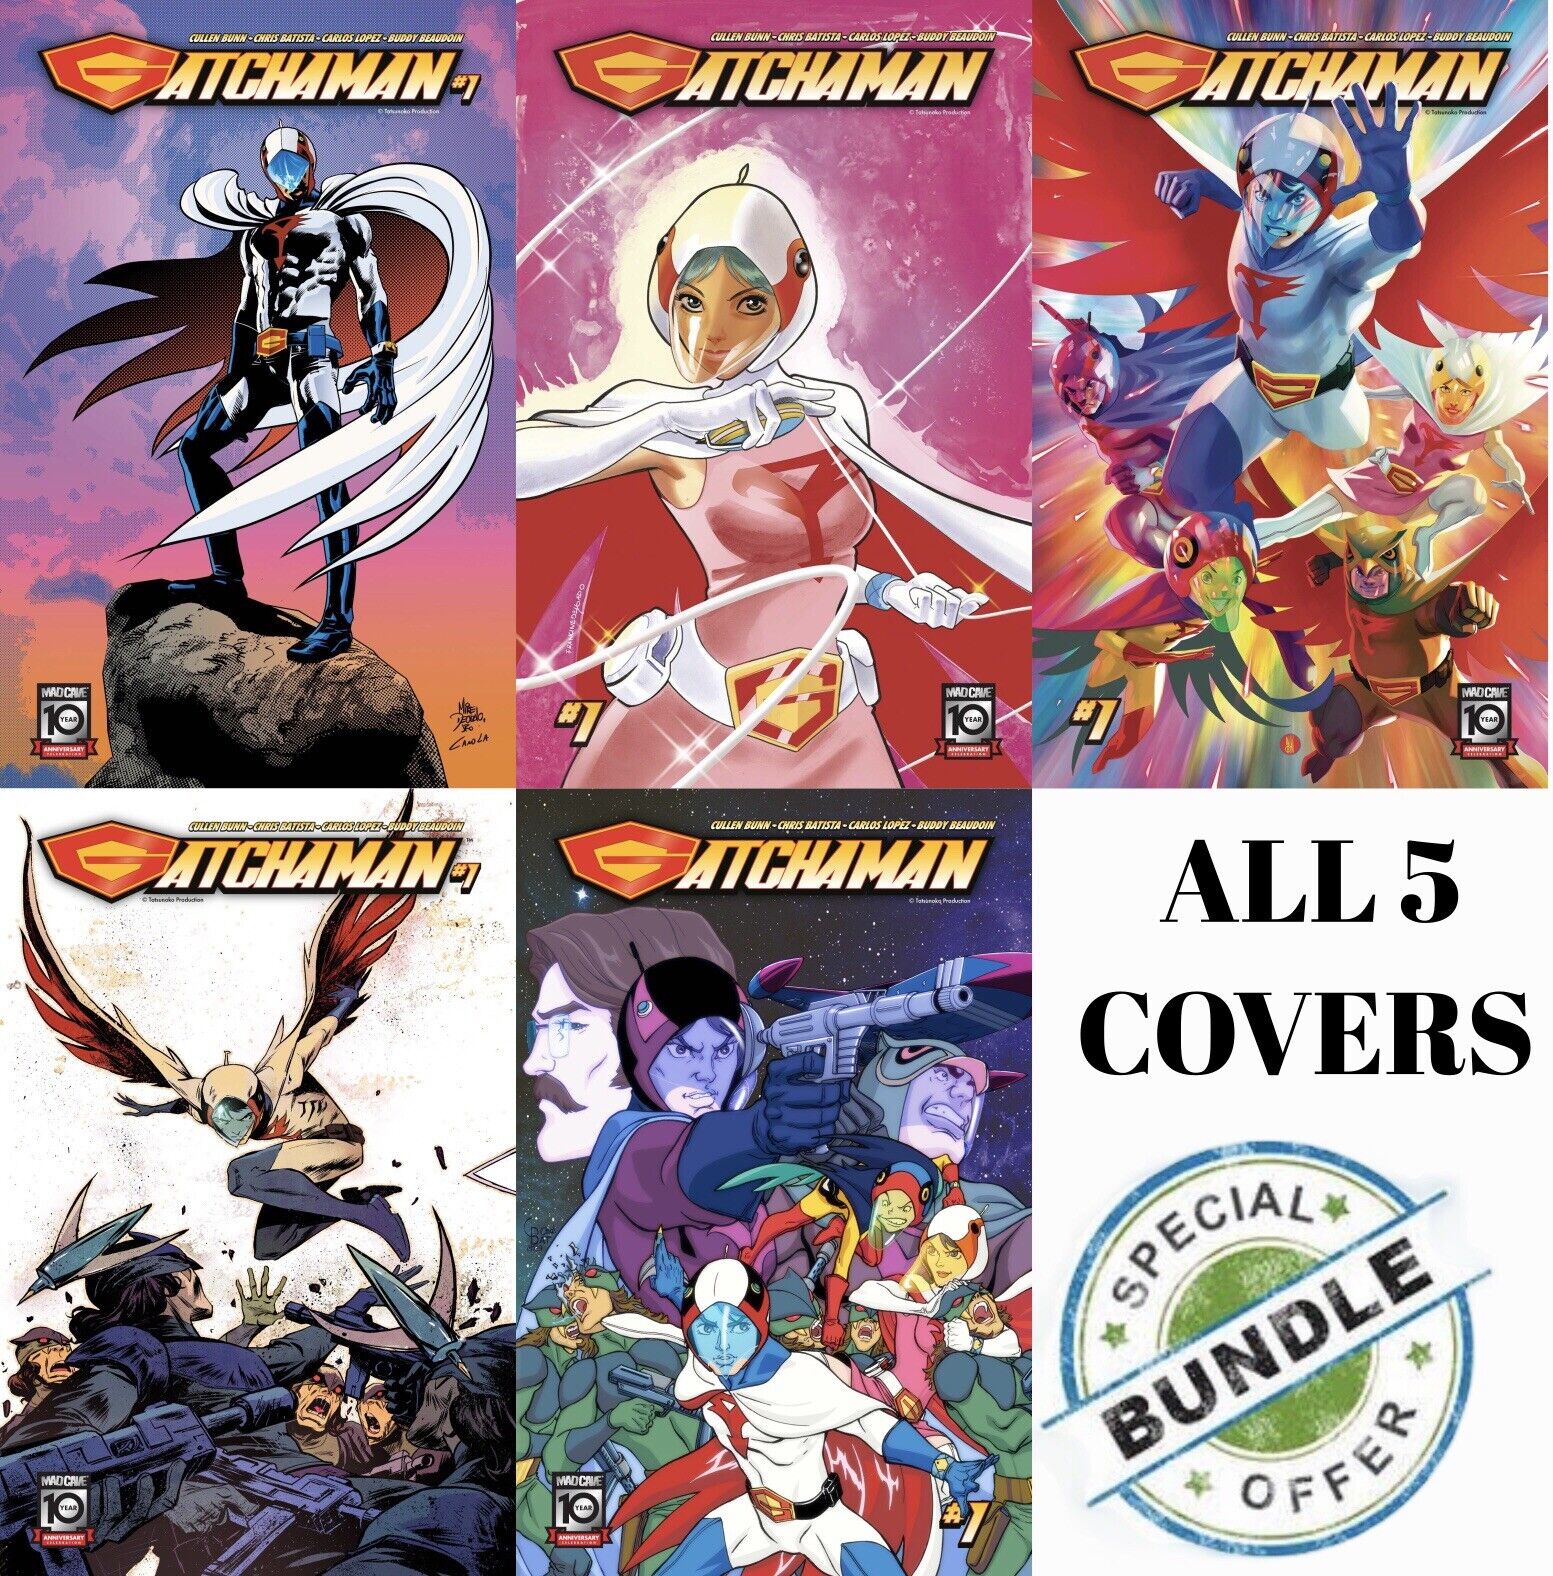 Gatchaman #1 All 5 Covers 1:20/1:10/A/B/C